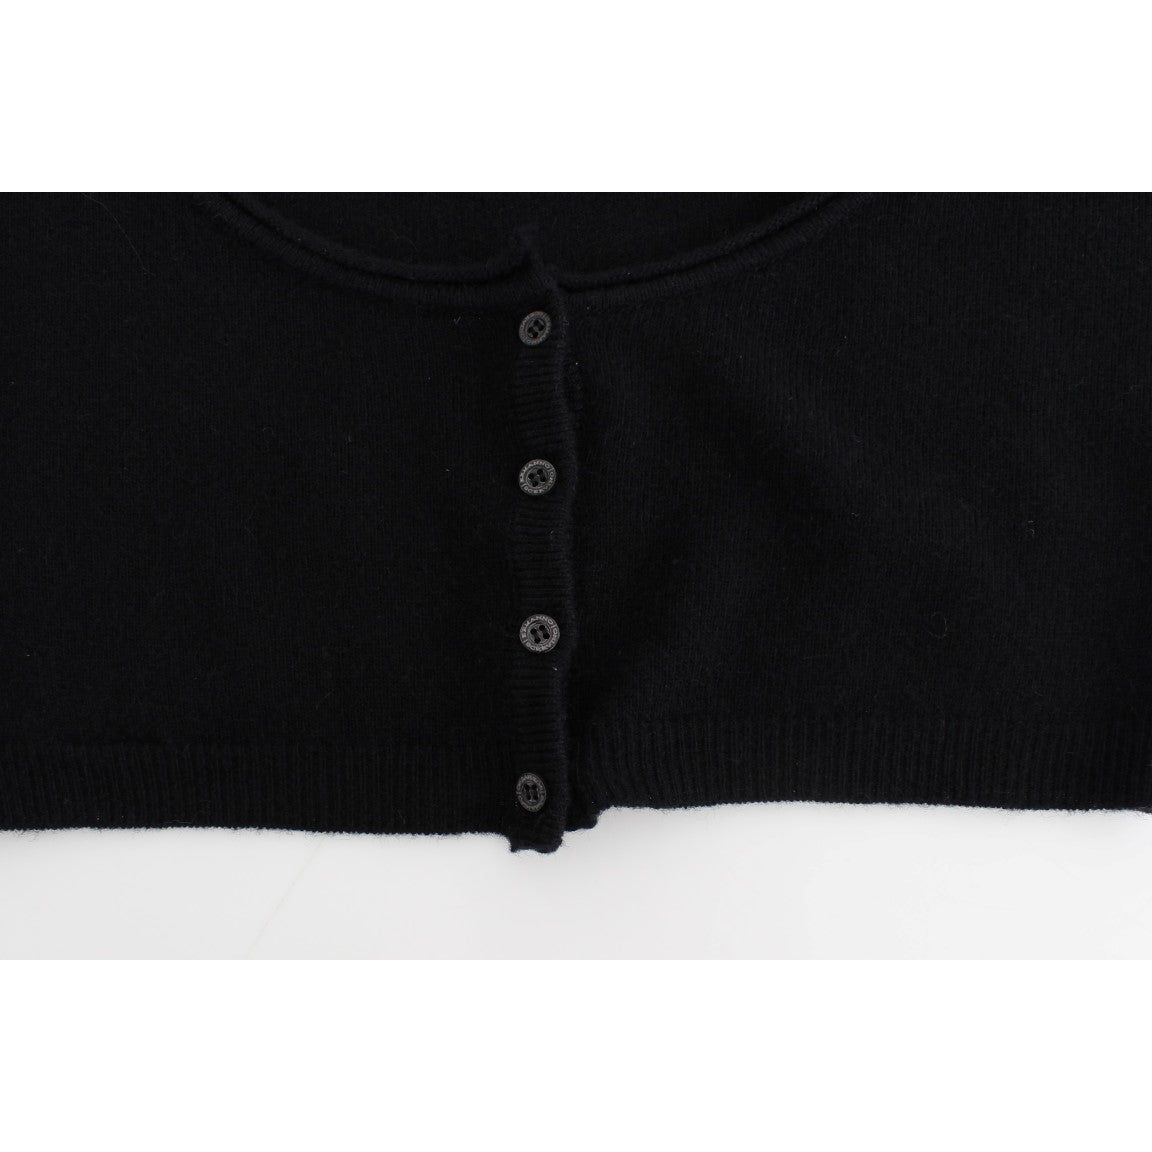 Ermanno Scervino Chic Cropped Black Wool-Cashmere Sweater black-cashmere-cardigan-sweater